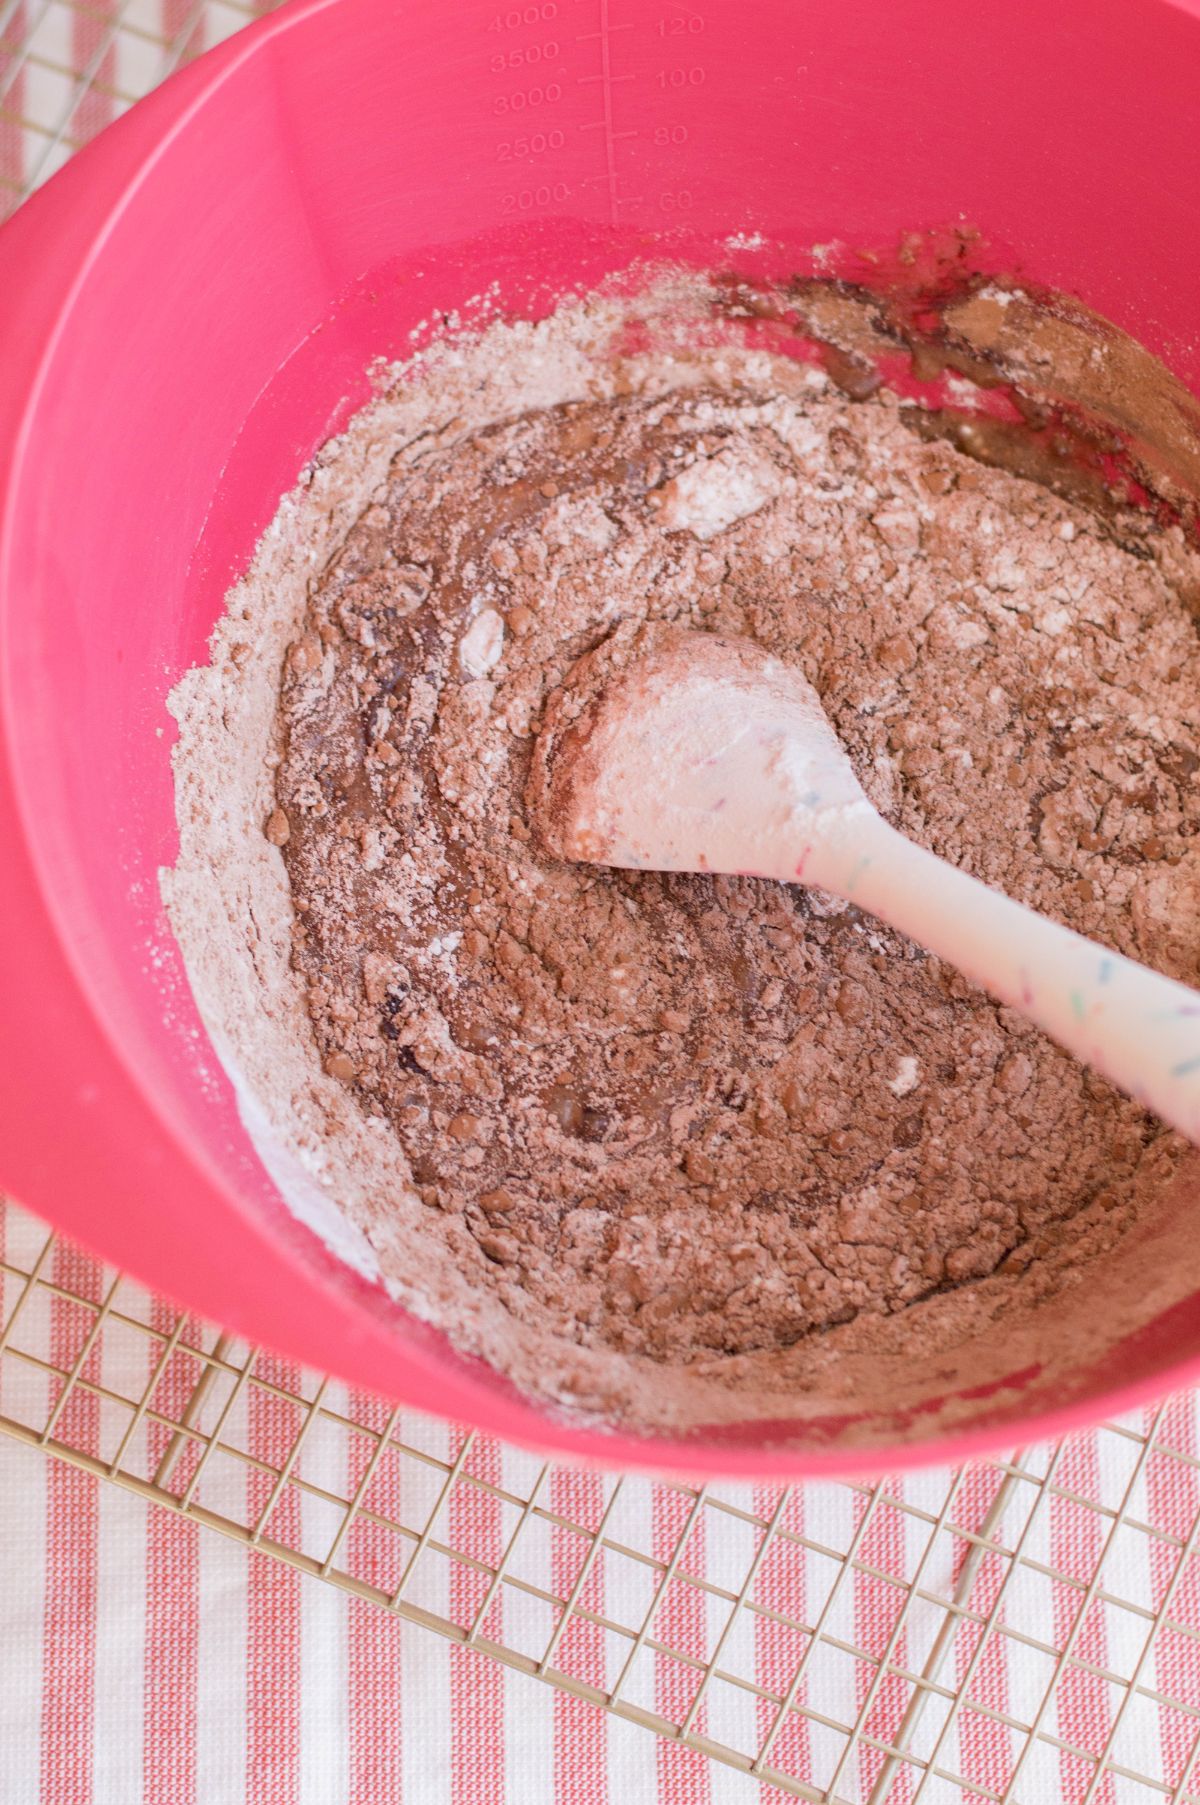 The flour, cocoa powder, baking soda, and salt are added to the wet ingredients.